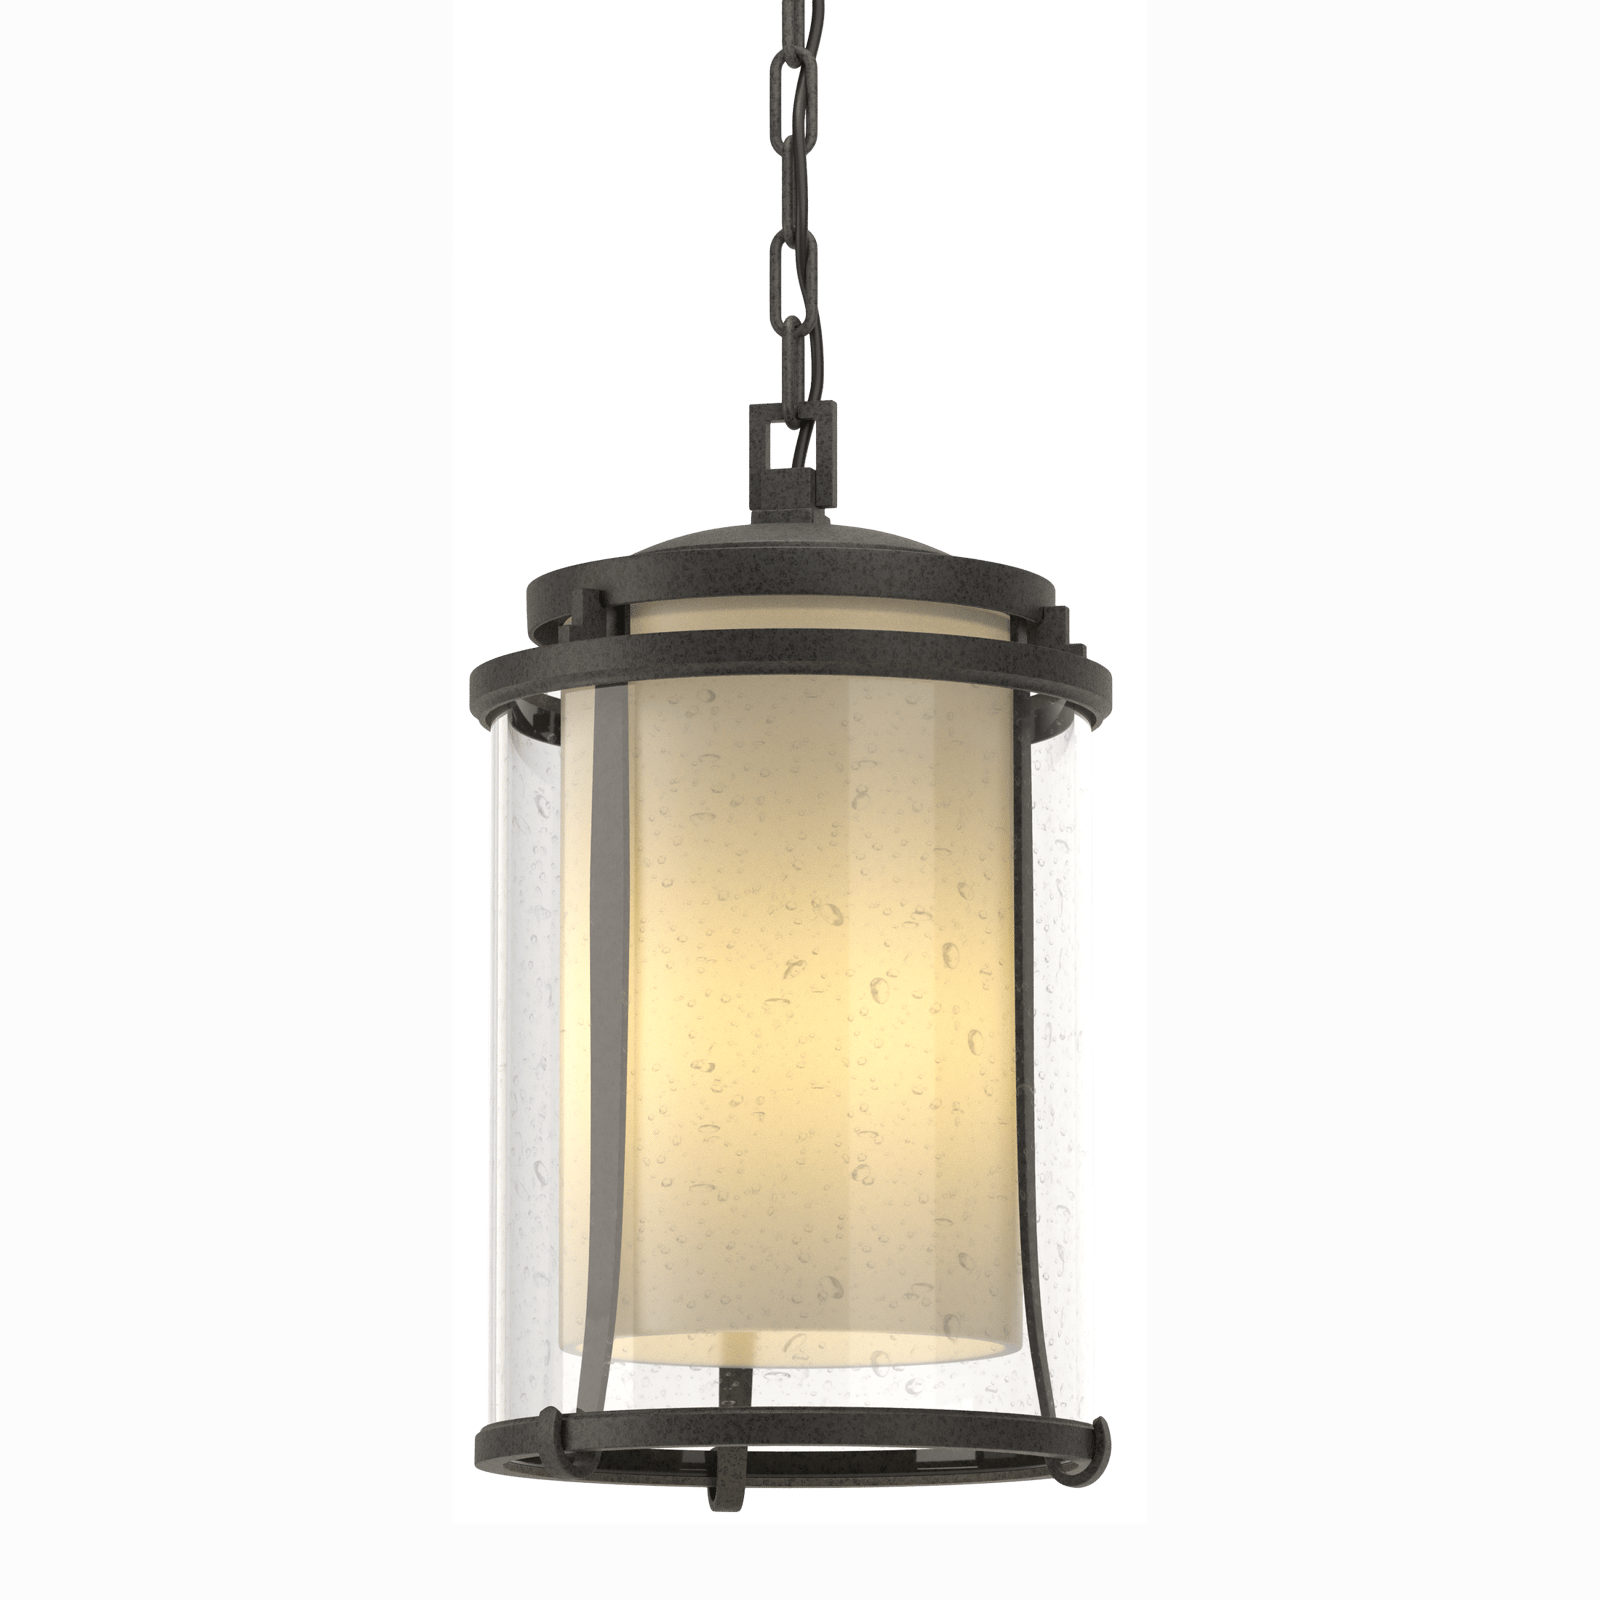 Hubbardton Forge Meridian Large Outdoor Ceiling Fixture Outdoor l Wall Hubbardton Forge Coastal Natural Iron Seeded Glass with Opal Diffuser (ZS) 